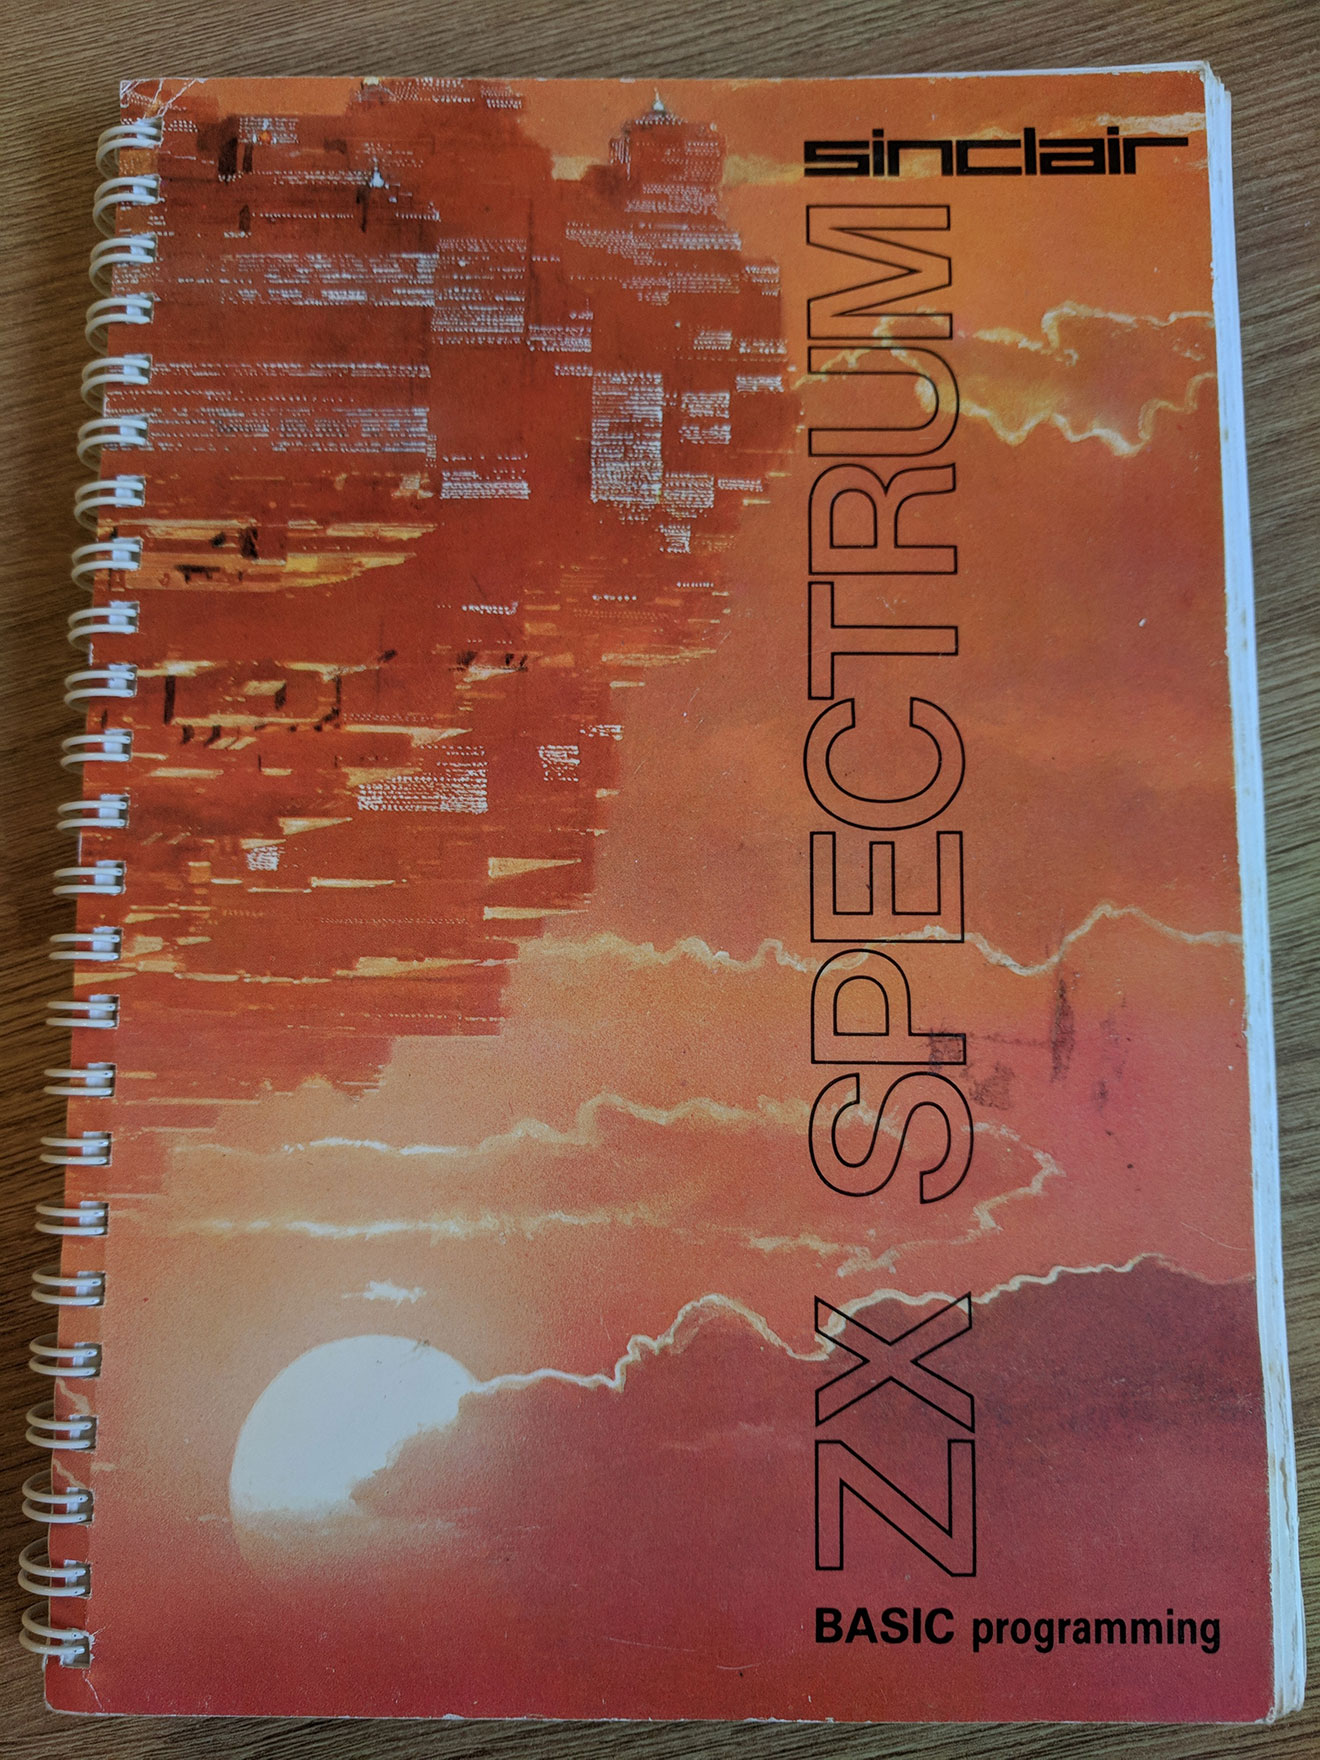 ZX Spectrum manual cover